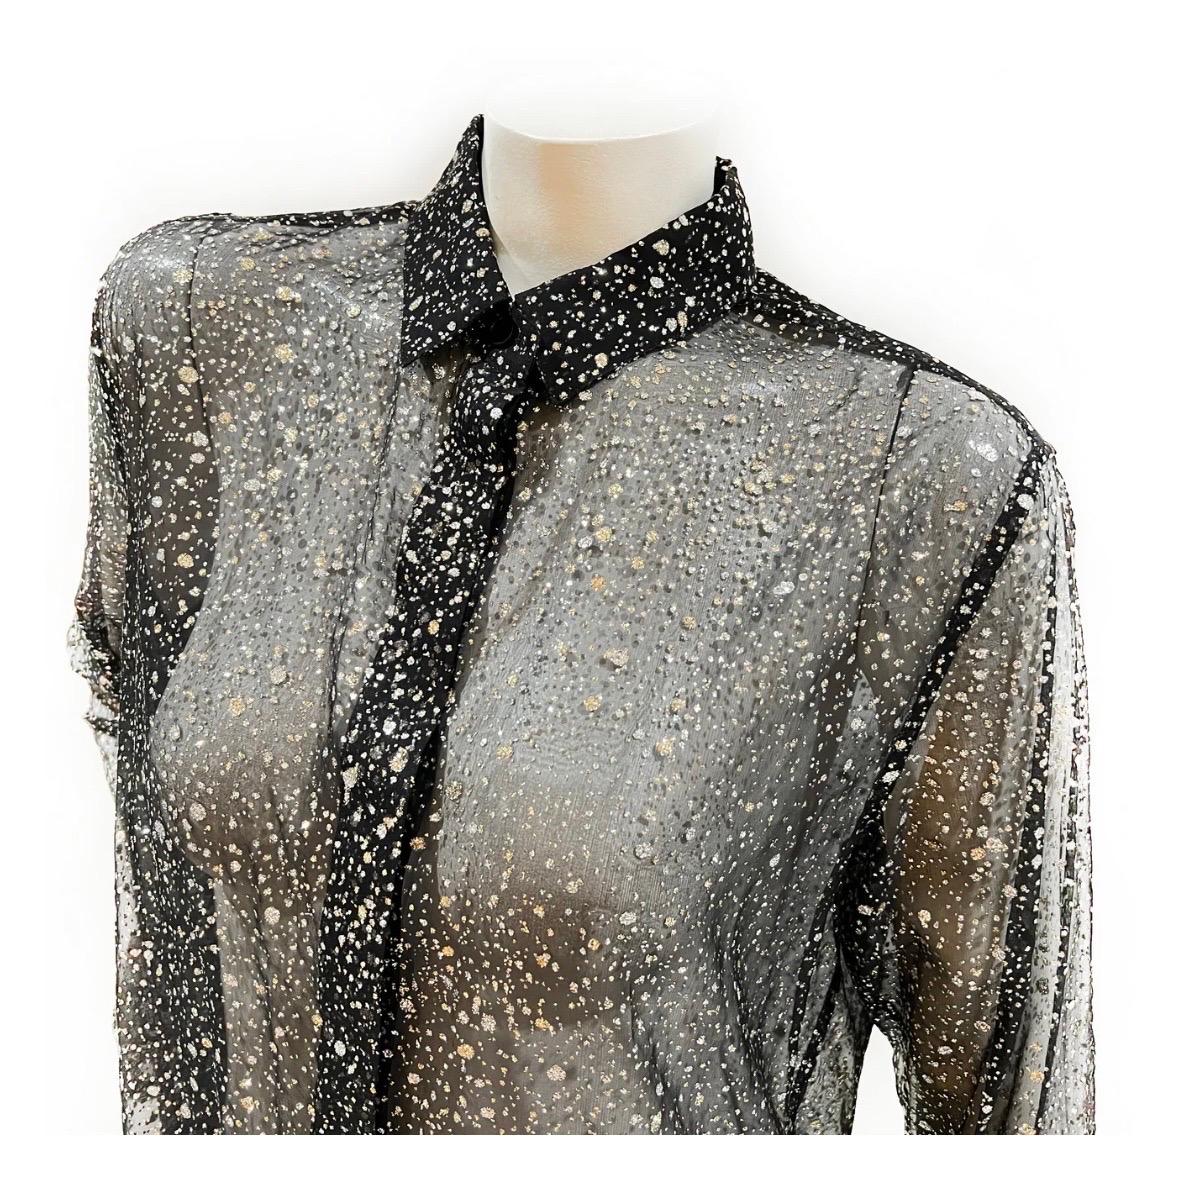 Sparkle Button Down Blouse by Saint Laurent
Spring / Summer 2017
Made in Italy
Black/silver/gold 
Sheer fabric detail
Gold and silver glitter detail throughout top
Invisible front button closure
Cuffs have button closure
Collar neckline detail
Long